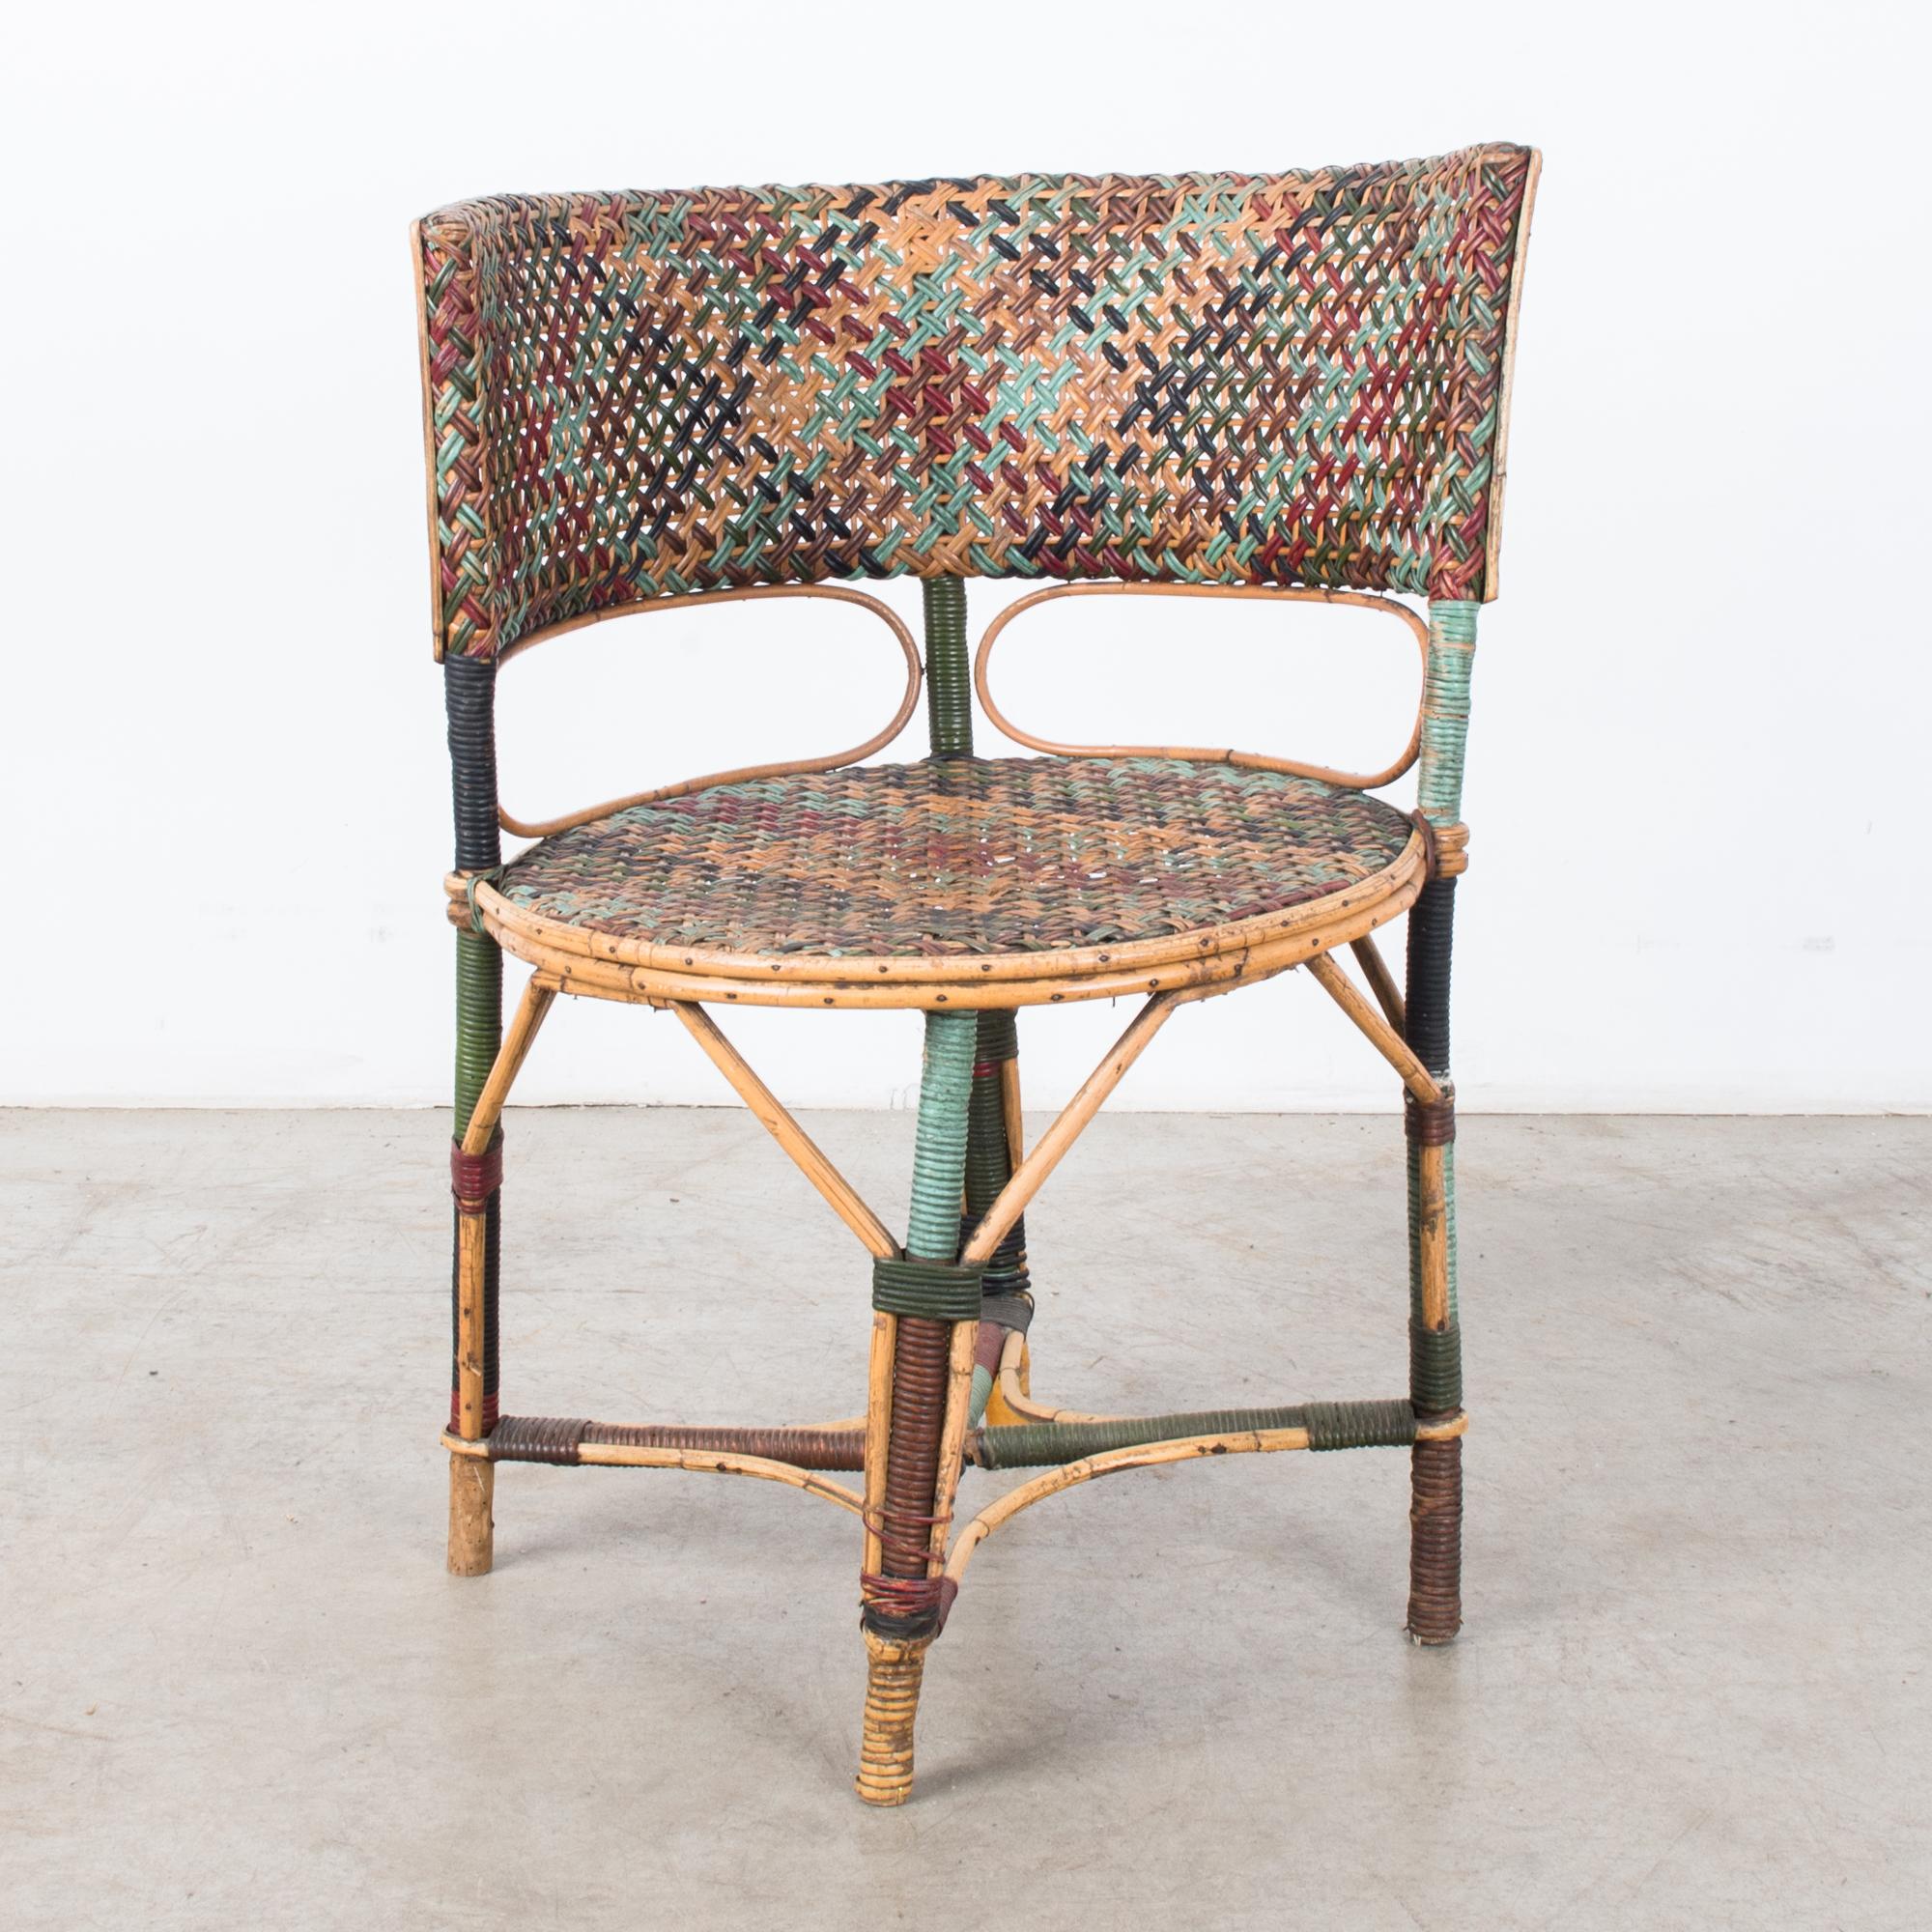 A 1920s French chair, made of colored rattan. A round seat and a curved backrest, with chair legs set in a diamond formation, creates a cubist bistro sensibility. A woven color palette of dark green, red and rust brown, black and teal blue, mixes